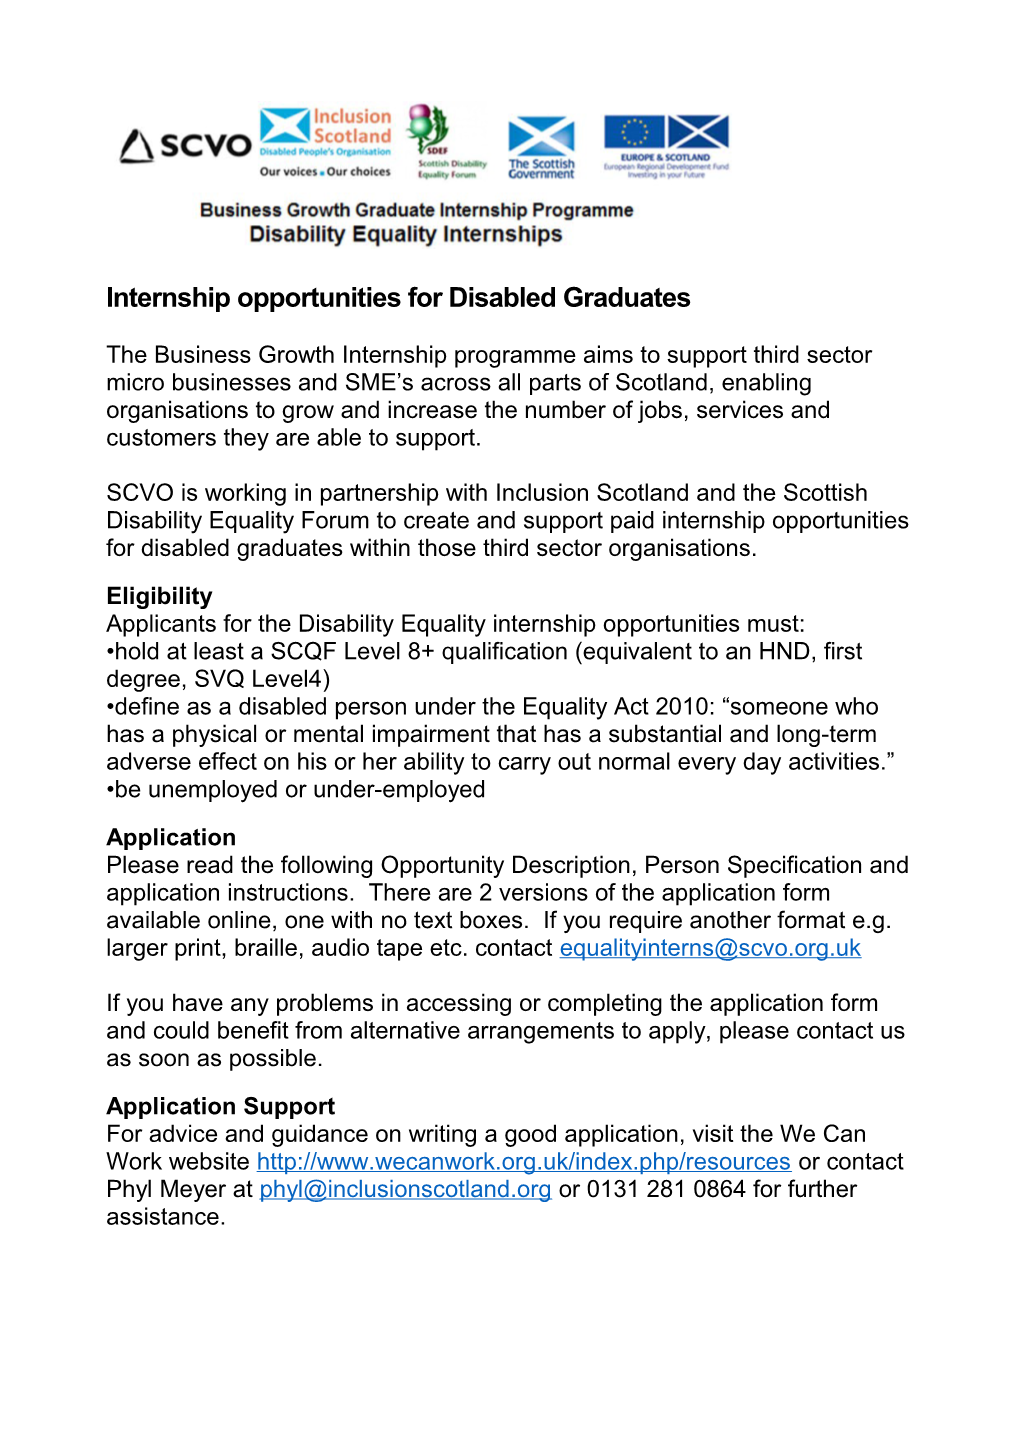 Internship Opportunities for Disabled Graduates